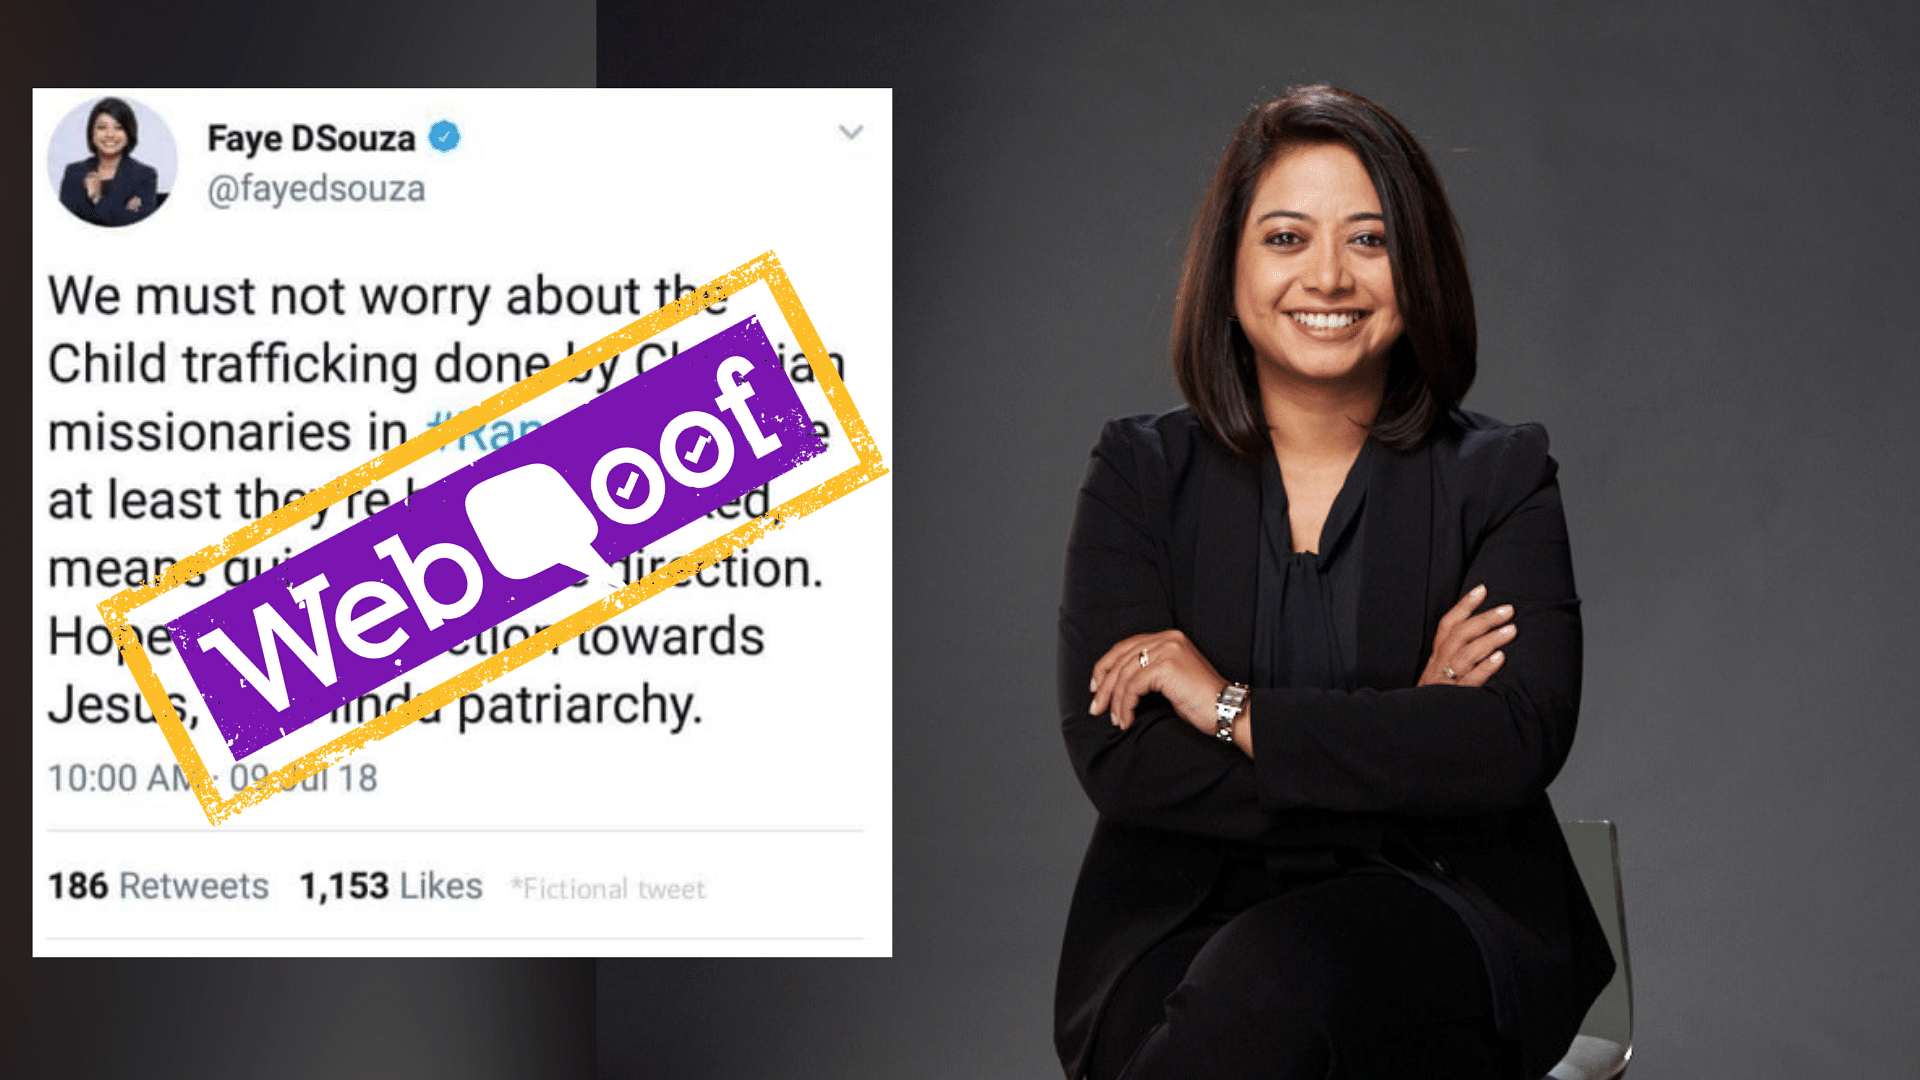 A tweet that was put out in Faye D’Souza’s name has been called out as fake by the journalist on the social media platform.&nbsp;